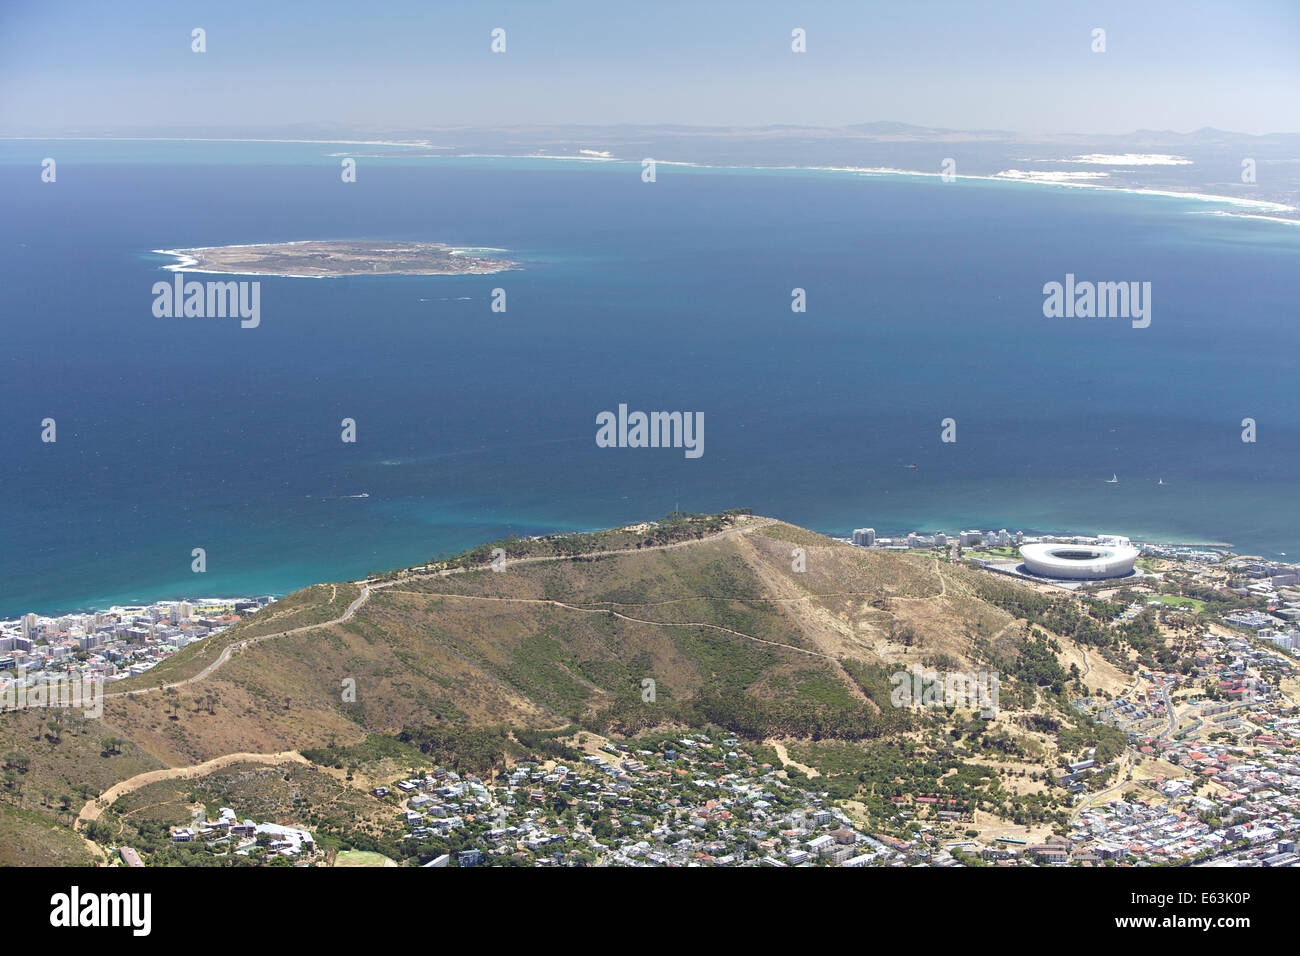 Aerial view of city of Cape Town taken from top of Table mountain.  Robin island and harbor view, South Africa Stock Photo